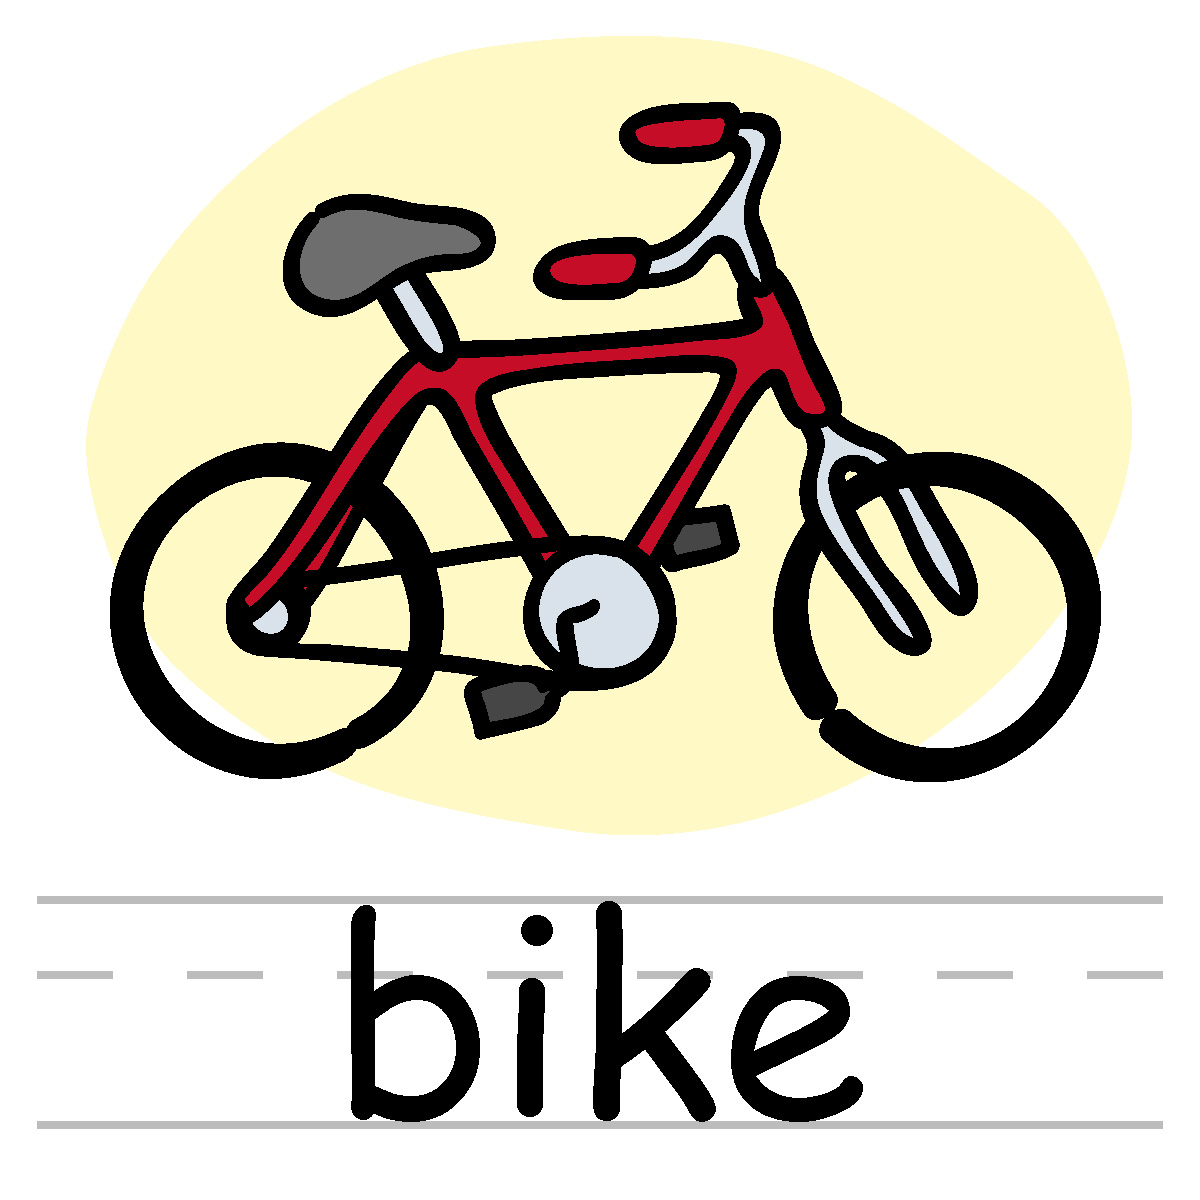 Bicycle simple bike clipart